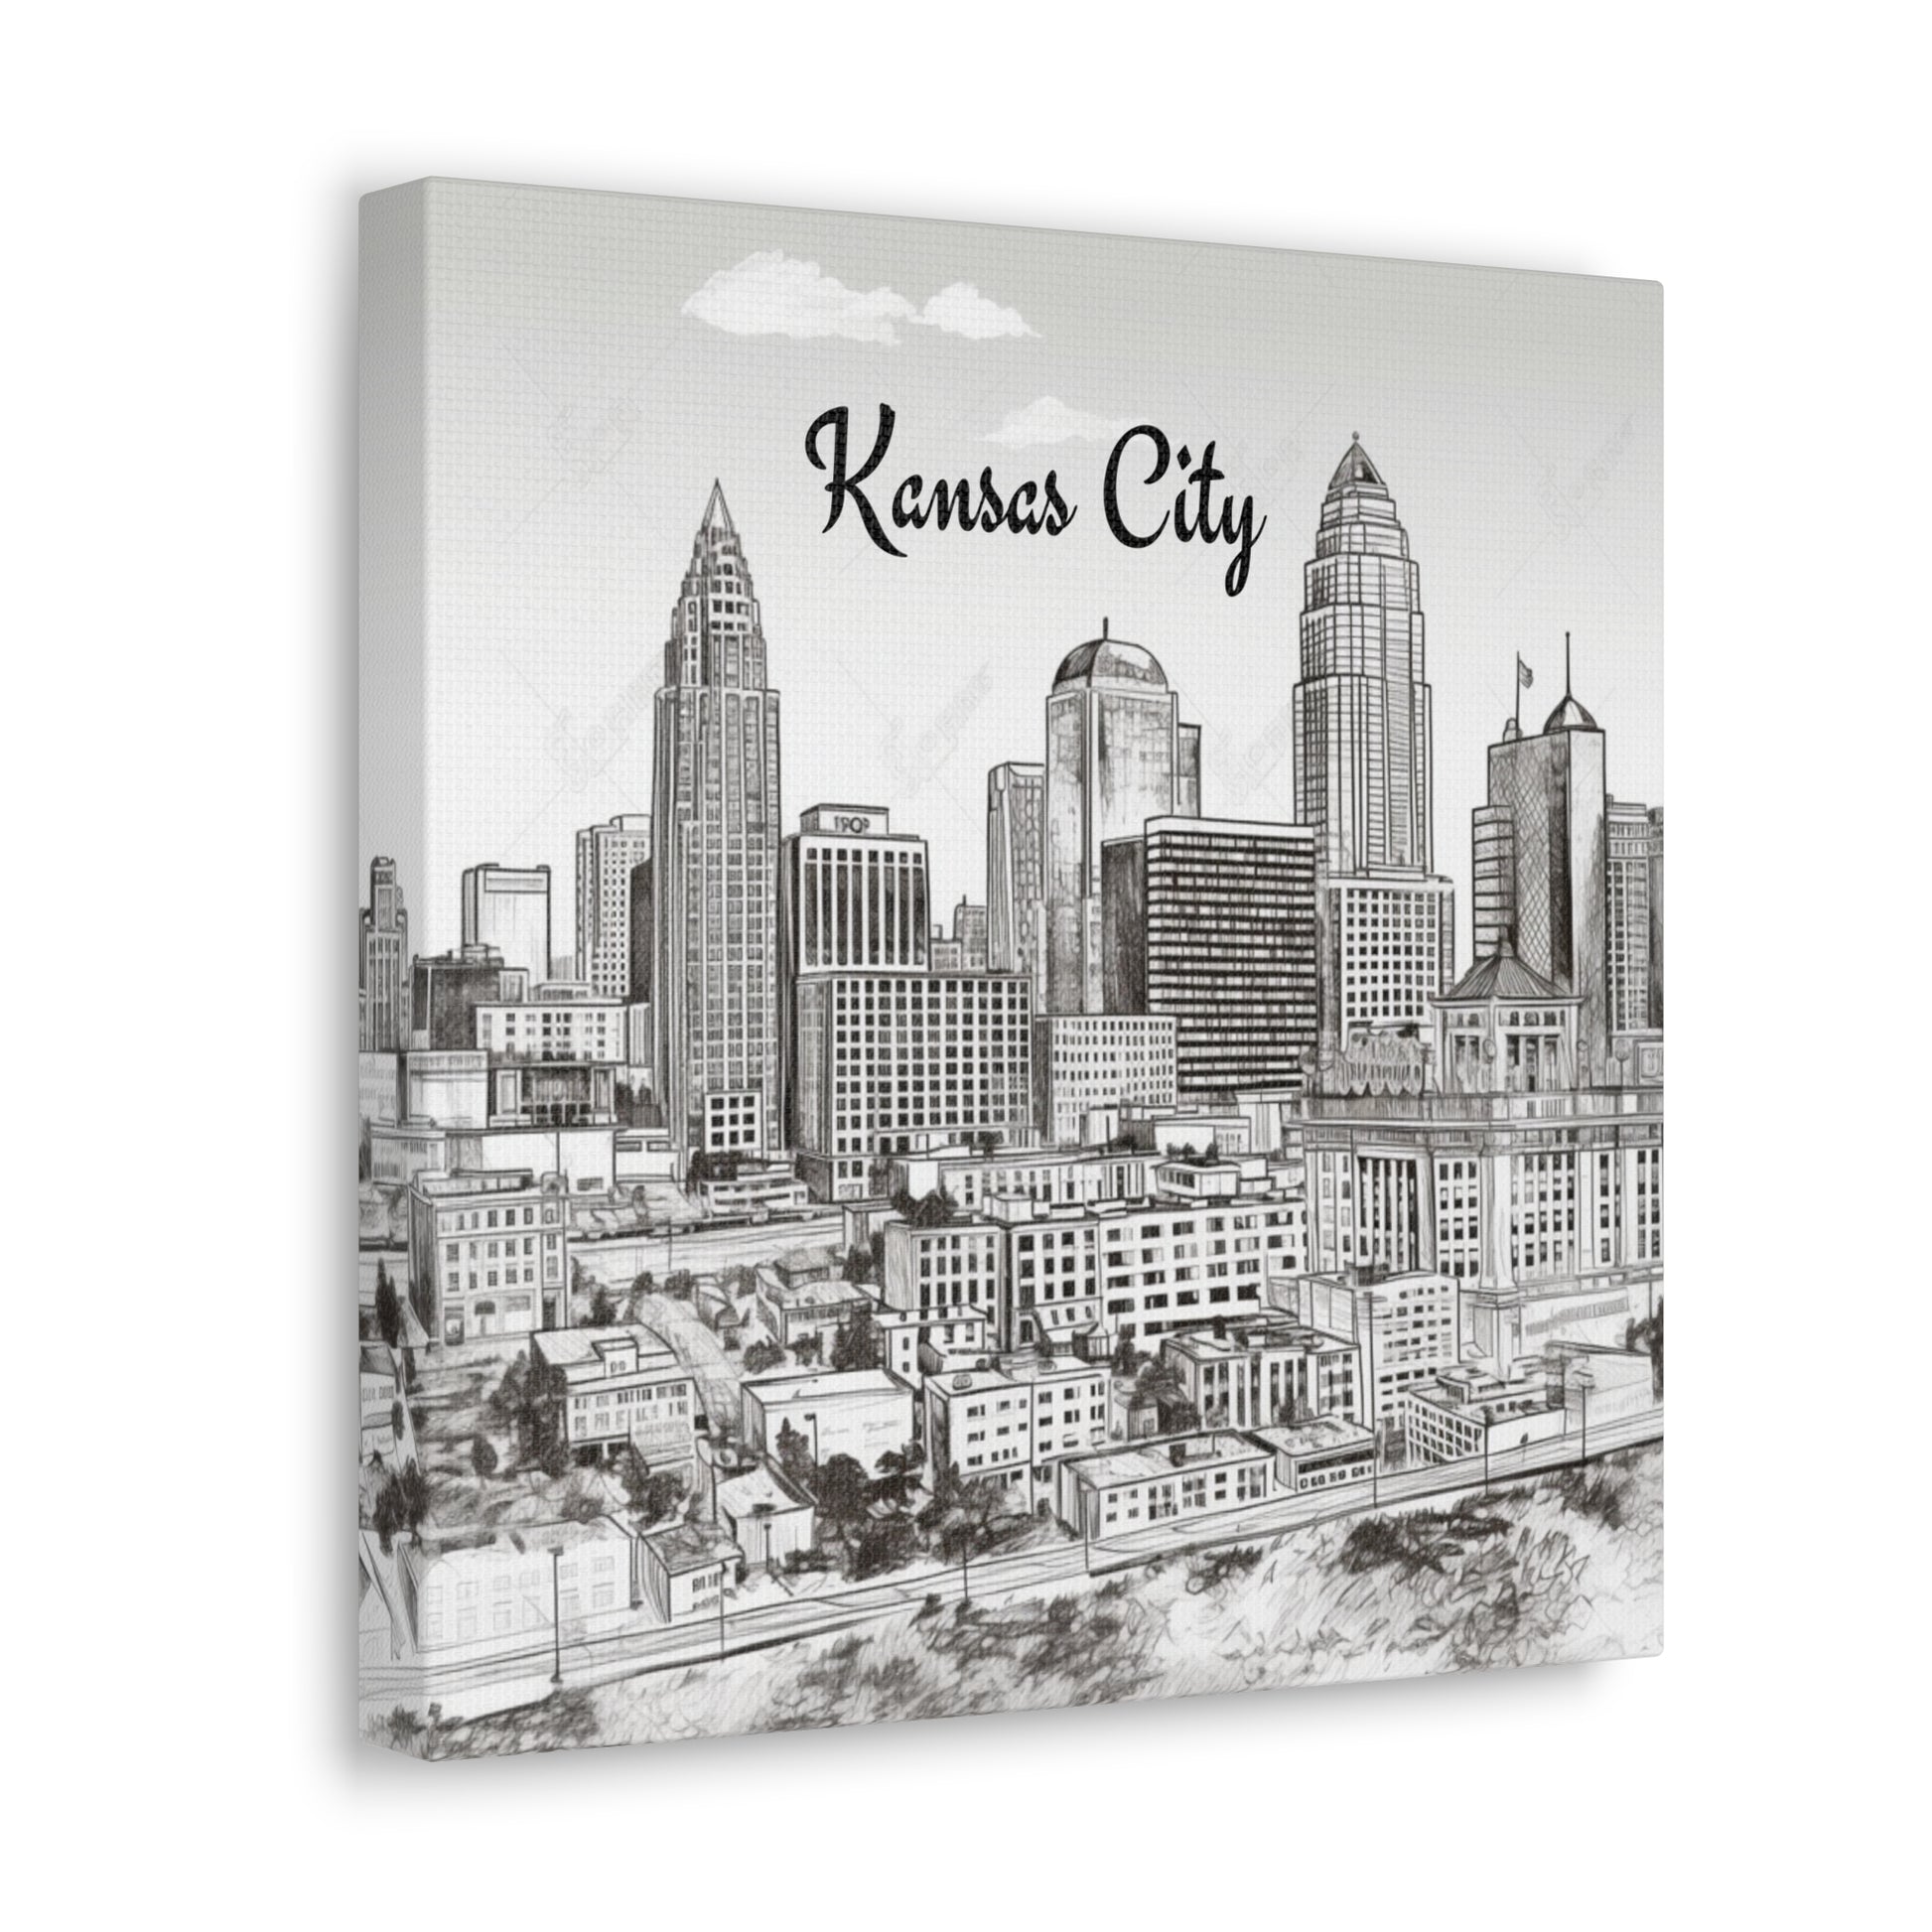 Indoor Kansas City skyline canvas wall art with high image clarity and detail.